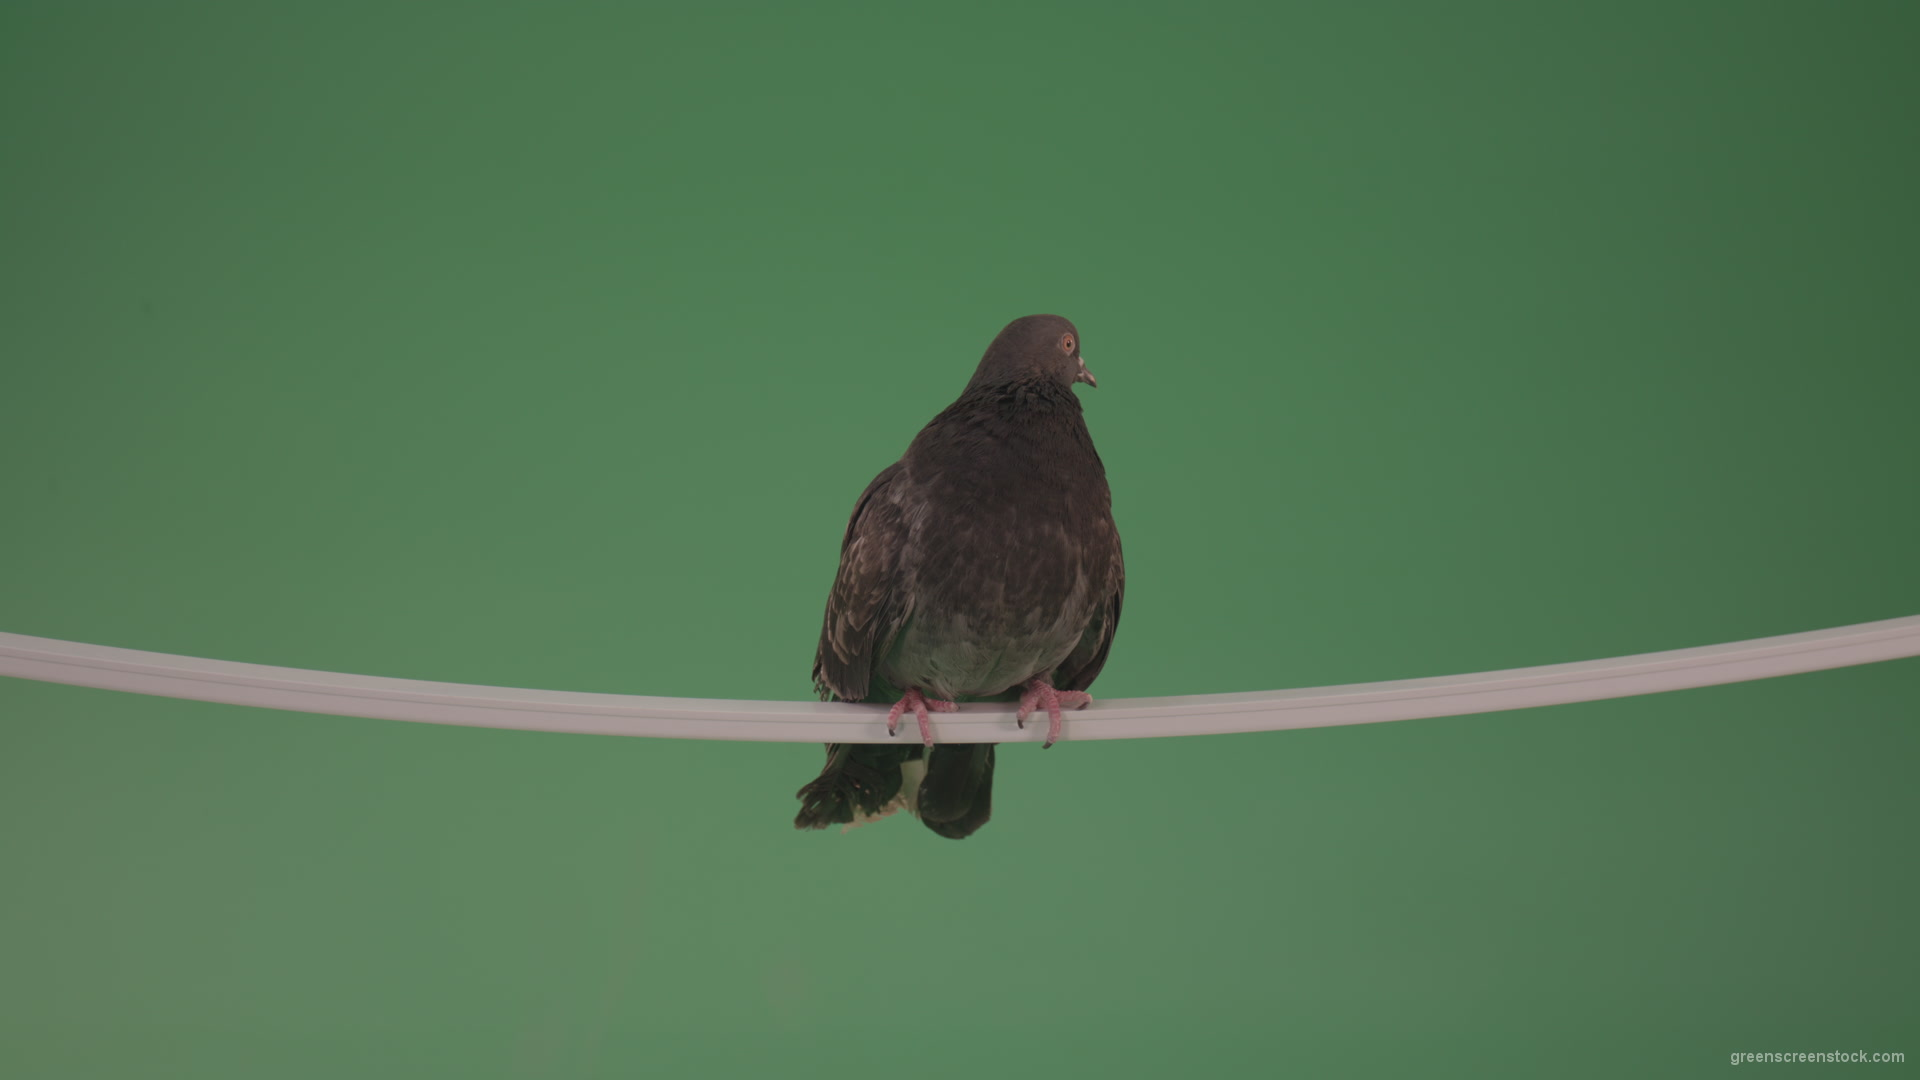 Bird-of-gray-color-doves-flies-from-branch-to-heaven-isolated-on-chromakey-background_001 Green Screen Stock